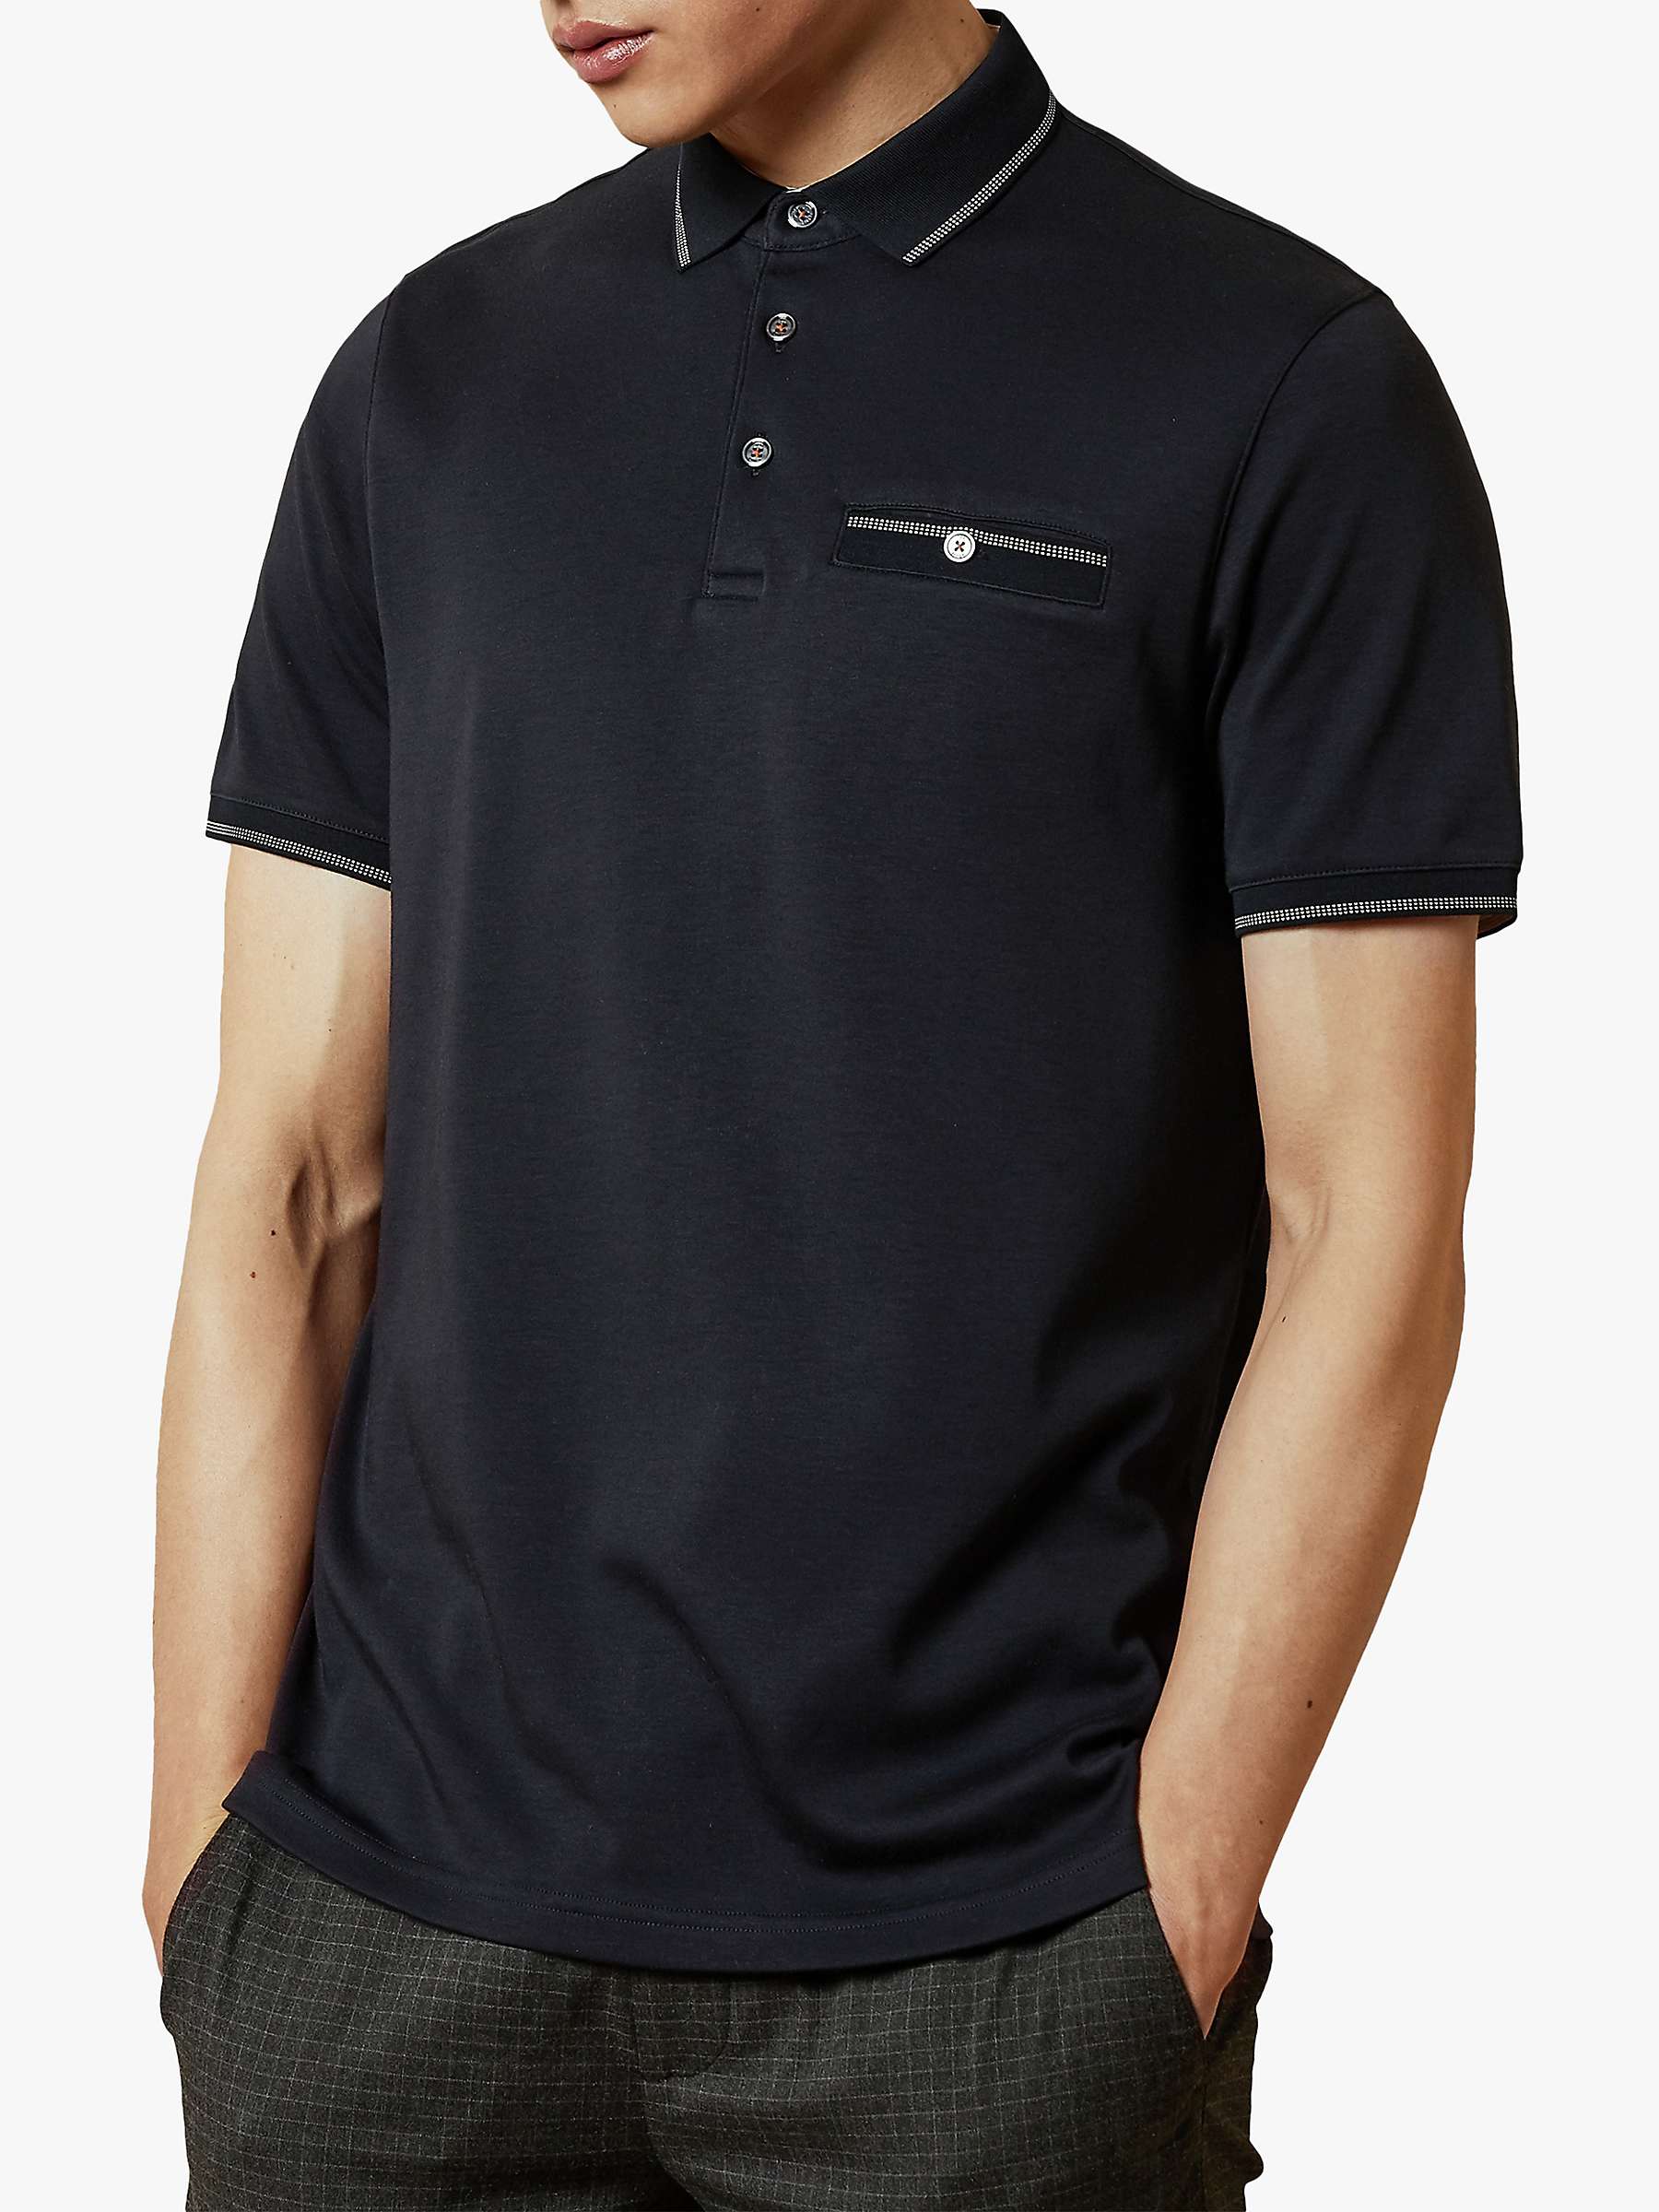 Buy Ted Baker Boomie Polo Shirt Online at johnlewis.com